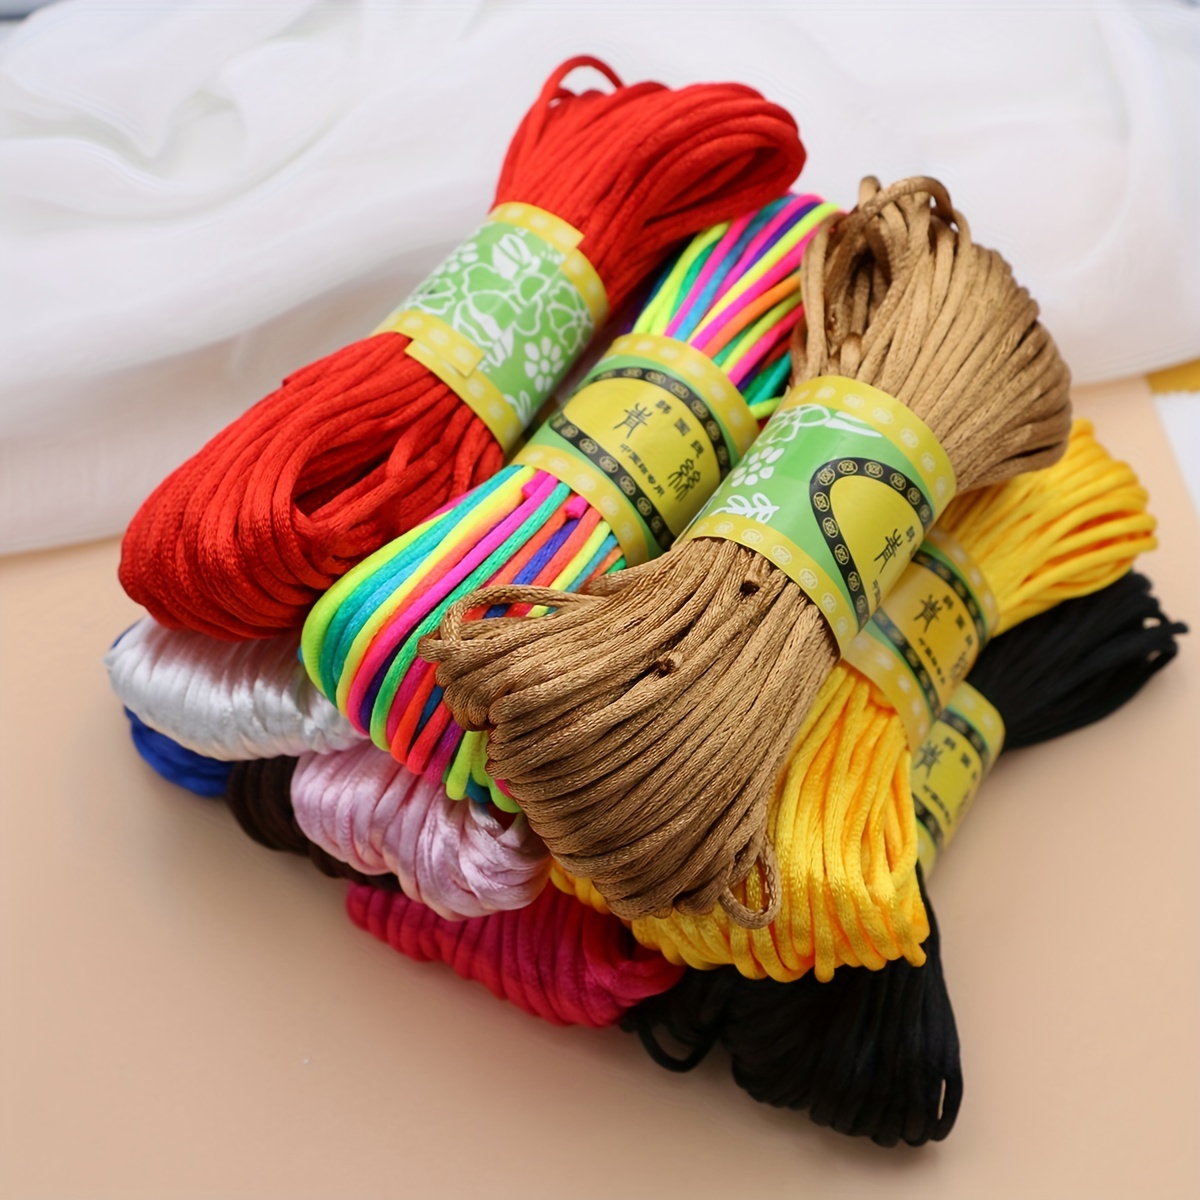 2 Rolls Silk Cord Rattail Silk Cord Chinese Knot Thread for